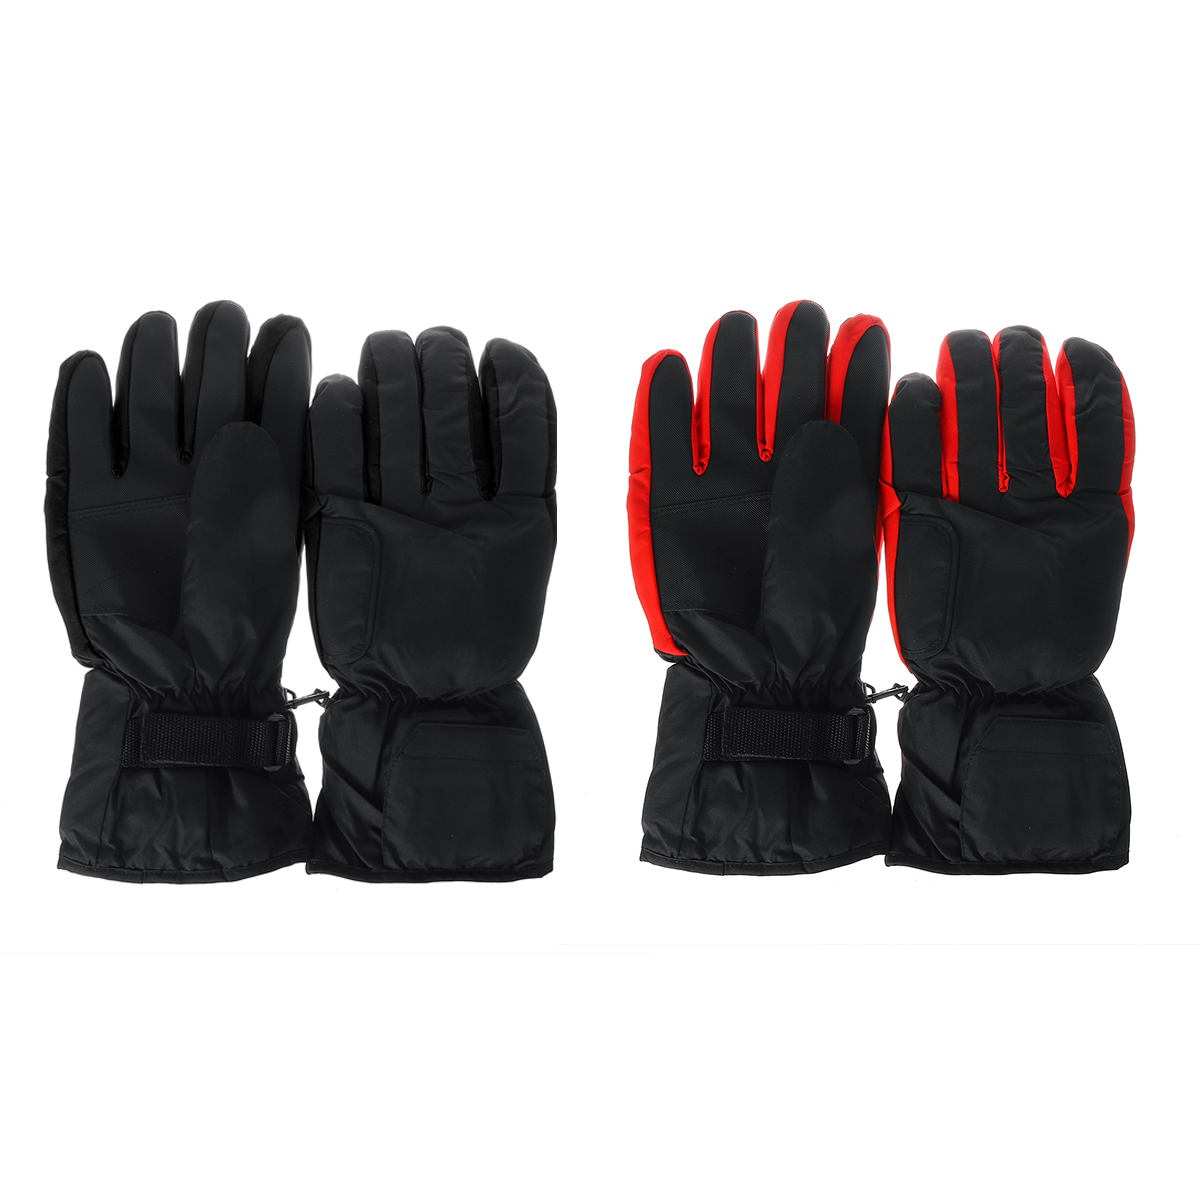 45V-Smart-Electric-Heated-Gloves-Winter-Ski-Cycling-Keep-Warm-Battery-Powered-Heating-Gloves-5-Finge-1771505-15